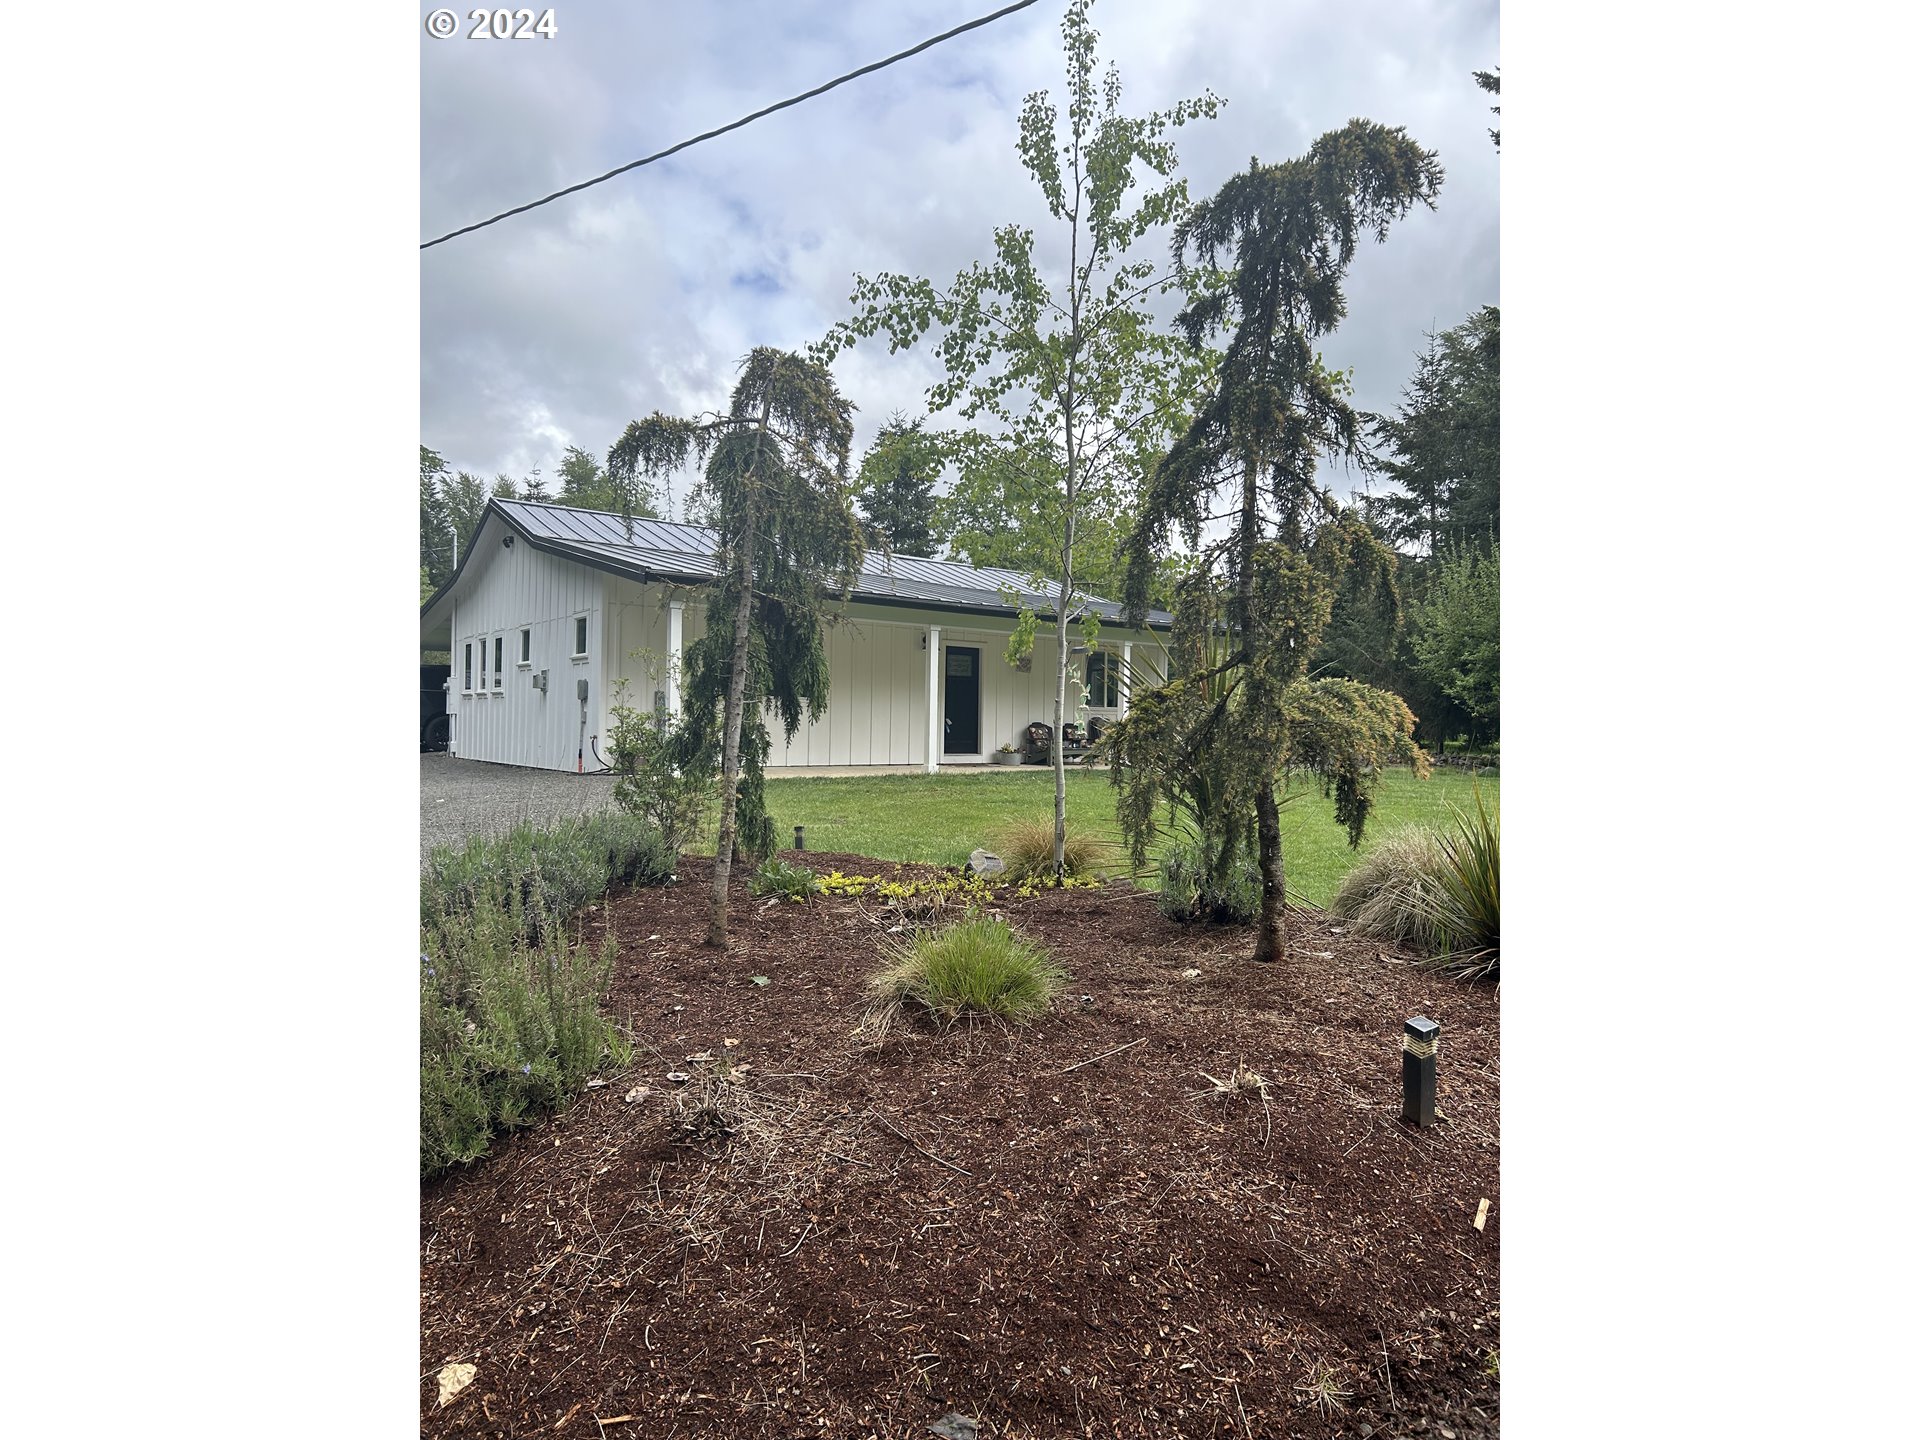 15959 S HOLMES RD, Molalla, OR 